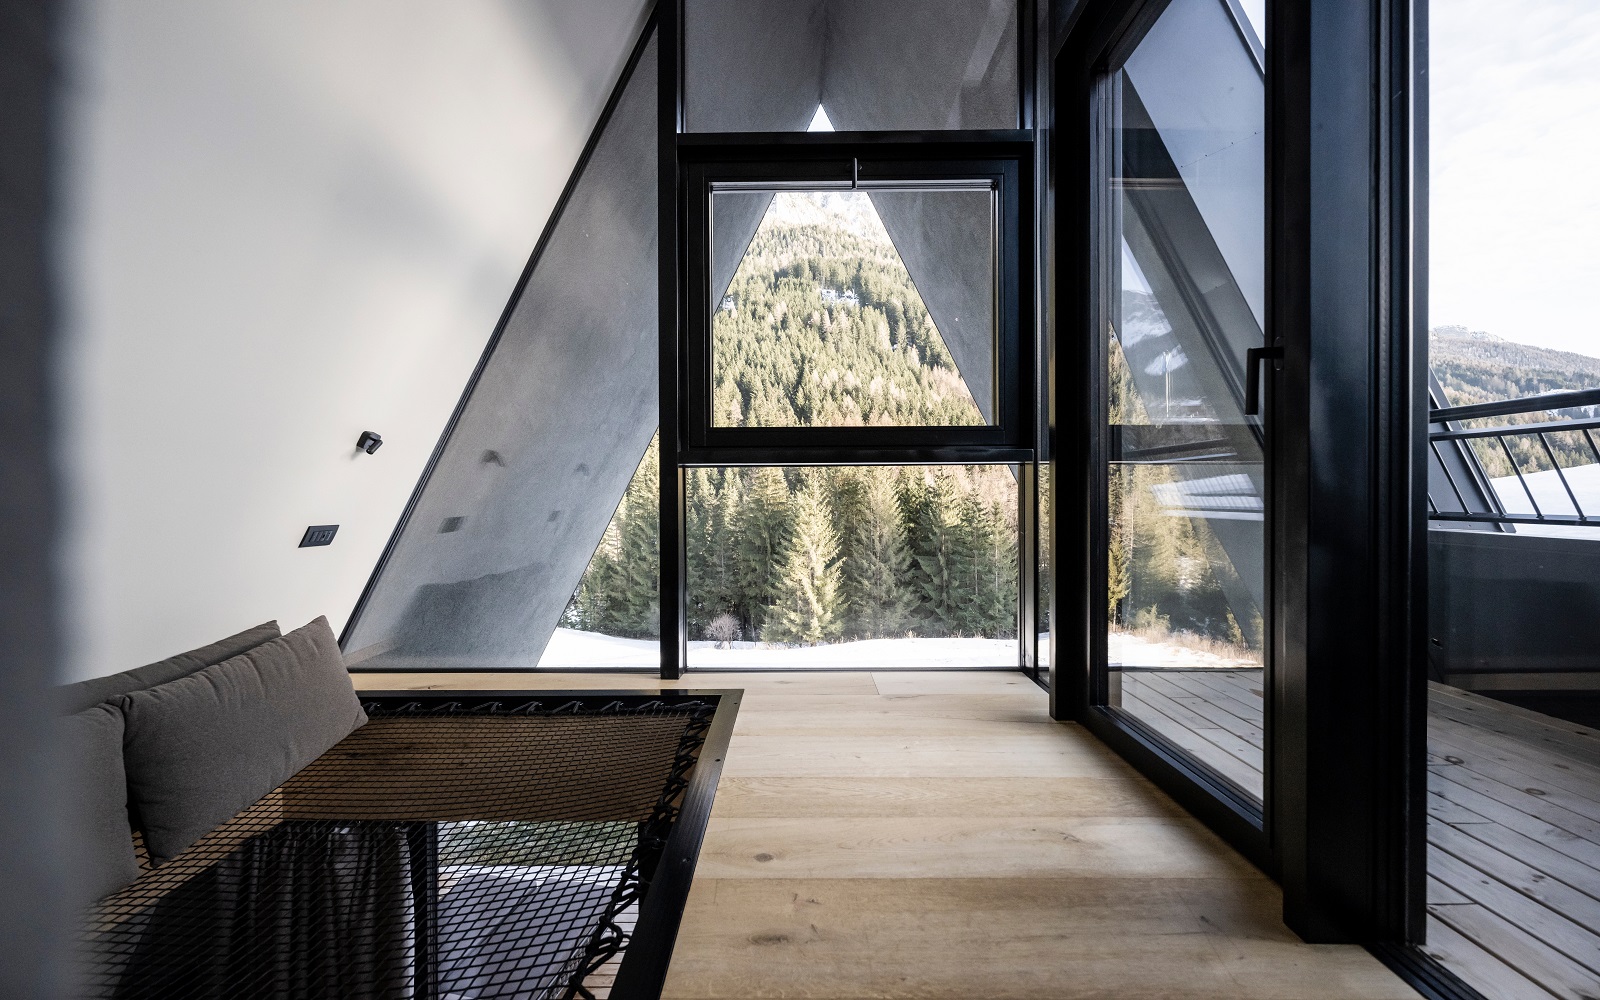 A-frame view onto mountains from loft Olympic Spa Hotel in Val di Fassa designed by NOA